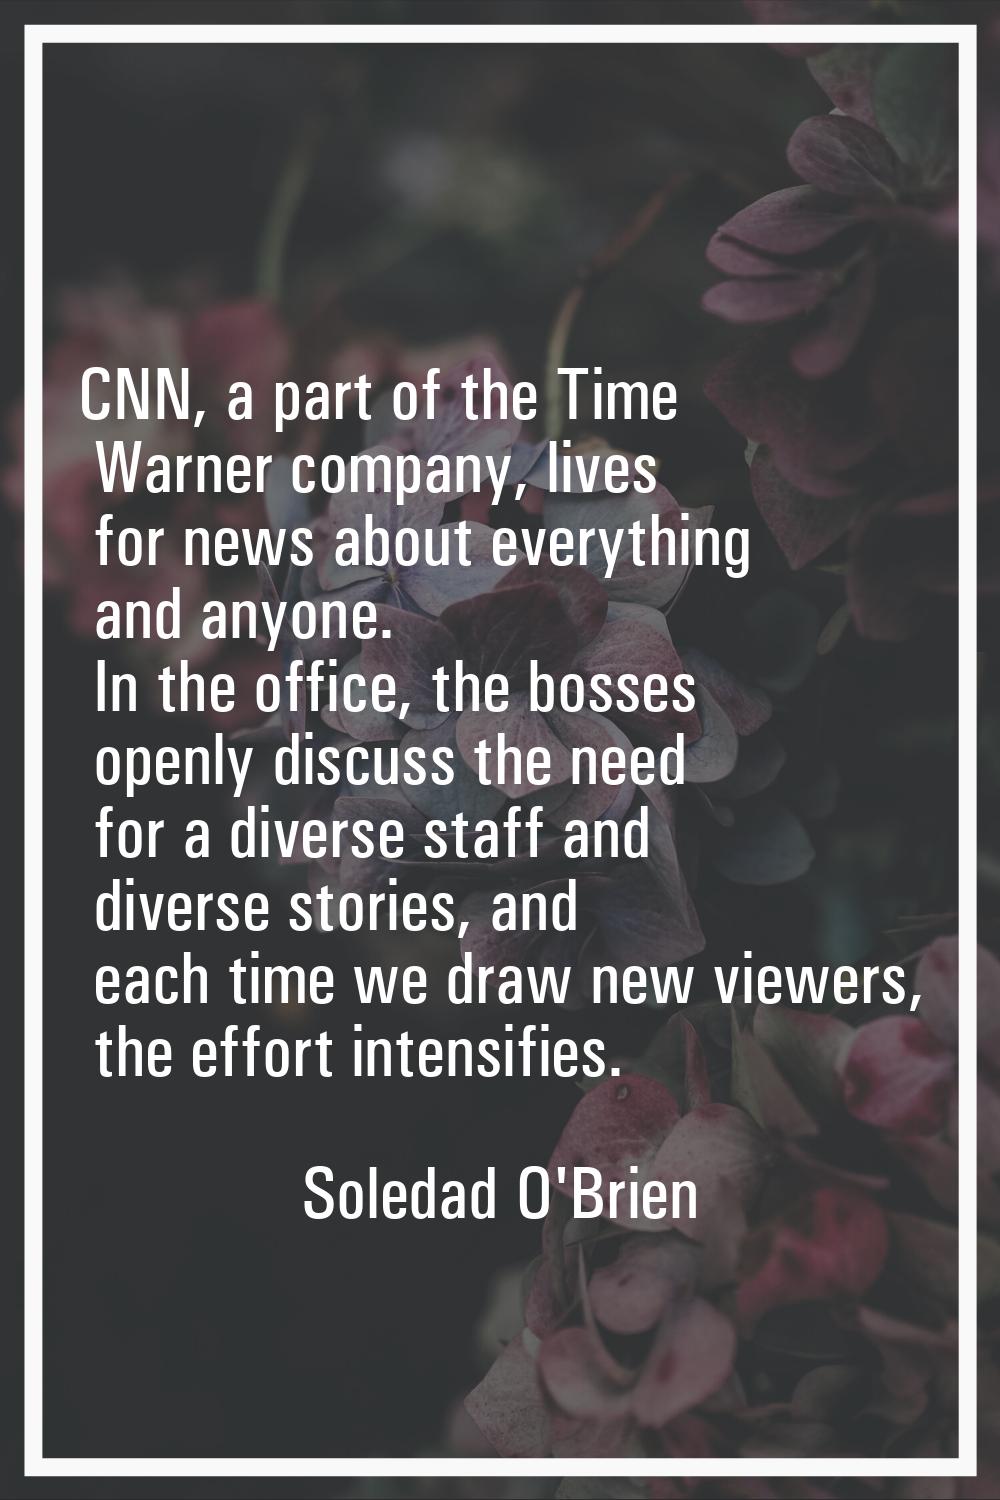 CNN, a part of the Time Warner company, lives for news about everything and anyone. In the office, 